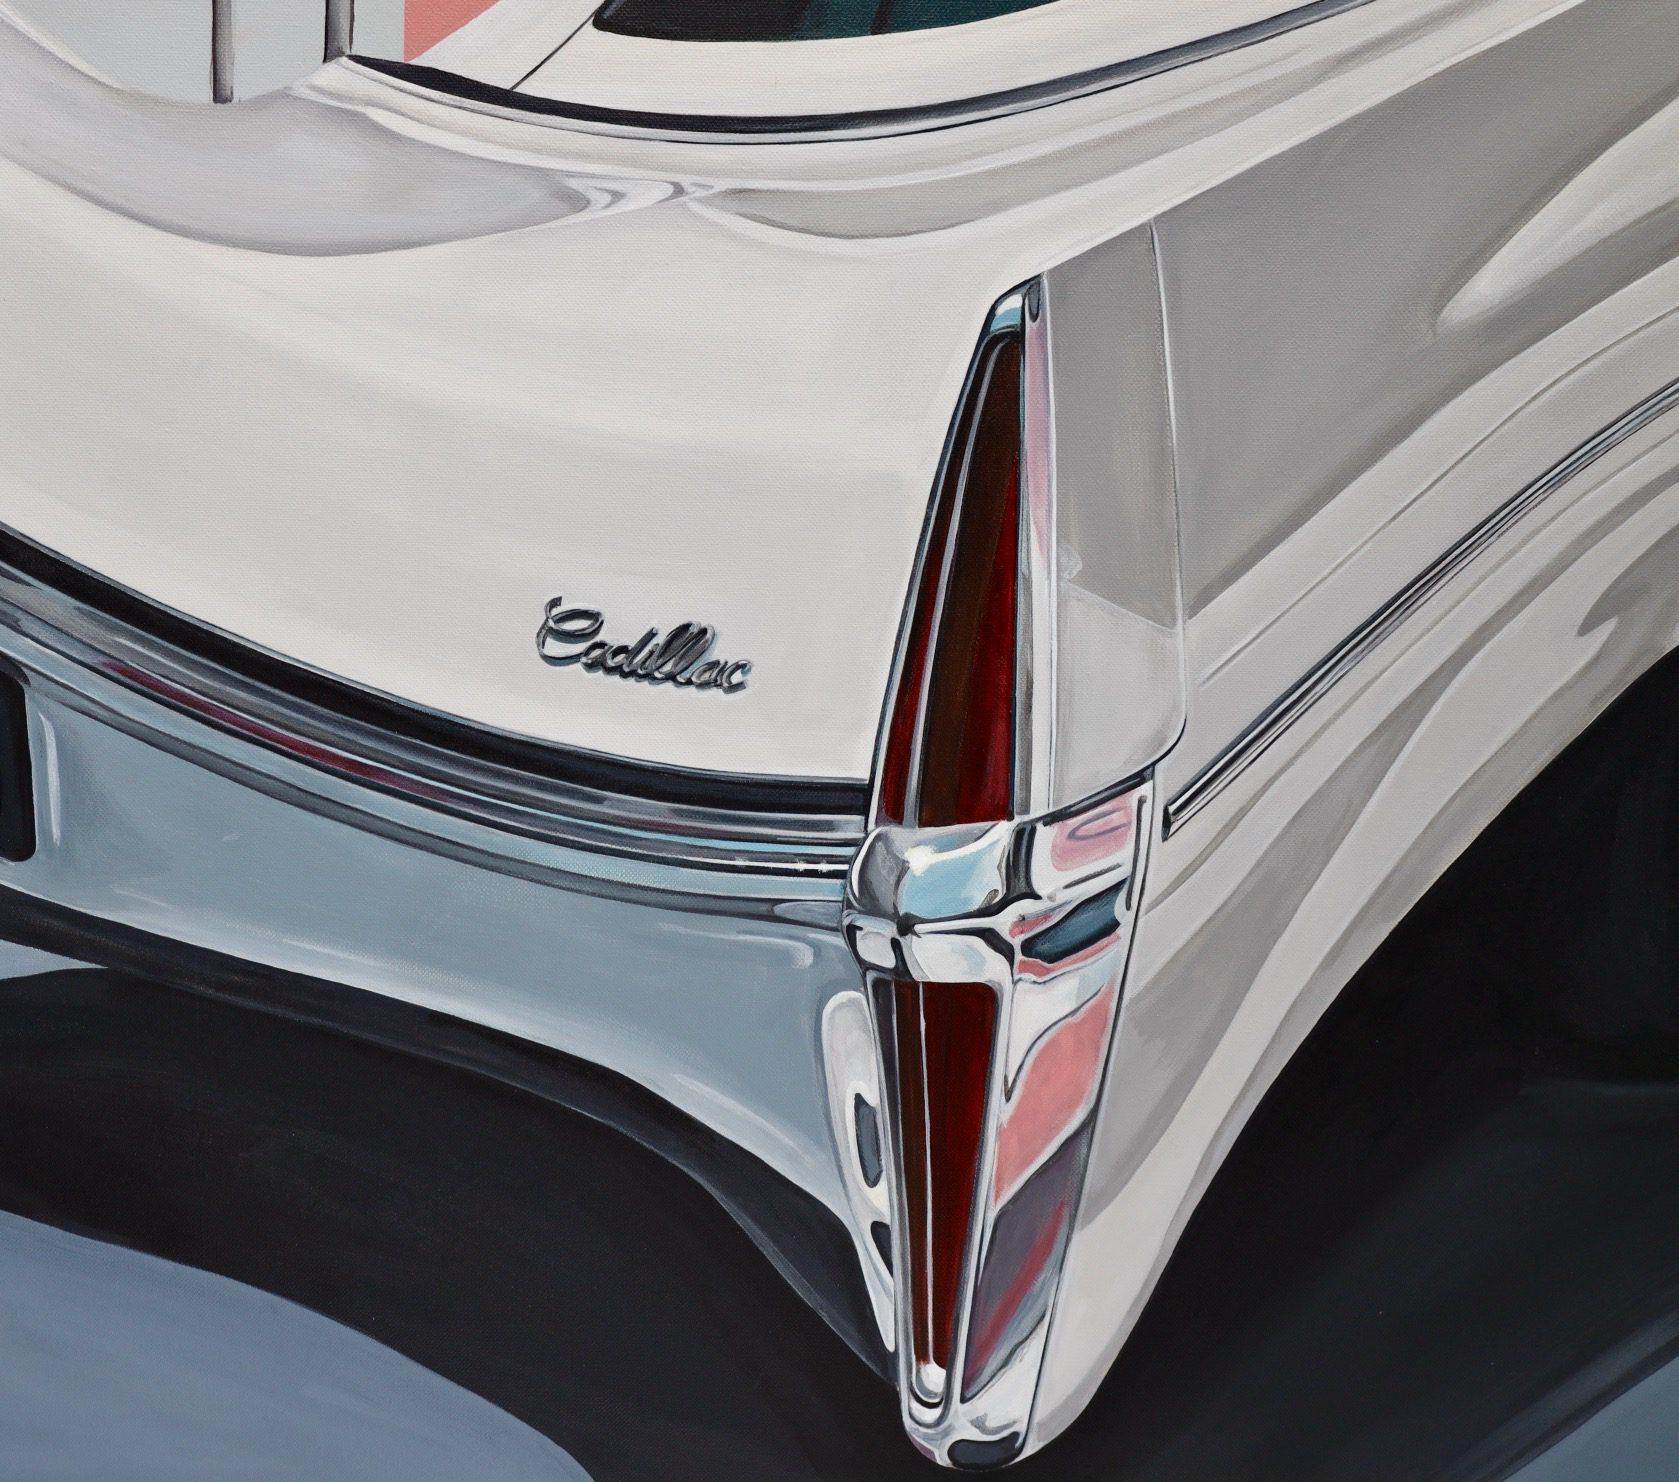 The painting “Fluid Cadi” draws inspiration from a fusion of the artist’s travel recollections and dreamscapes. Captured during a trip to California, the artist encountered this Cadillac on a quiet street just off Hollywood Blvd. In recalling the